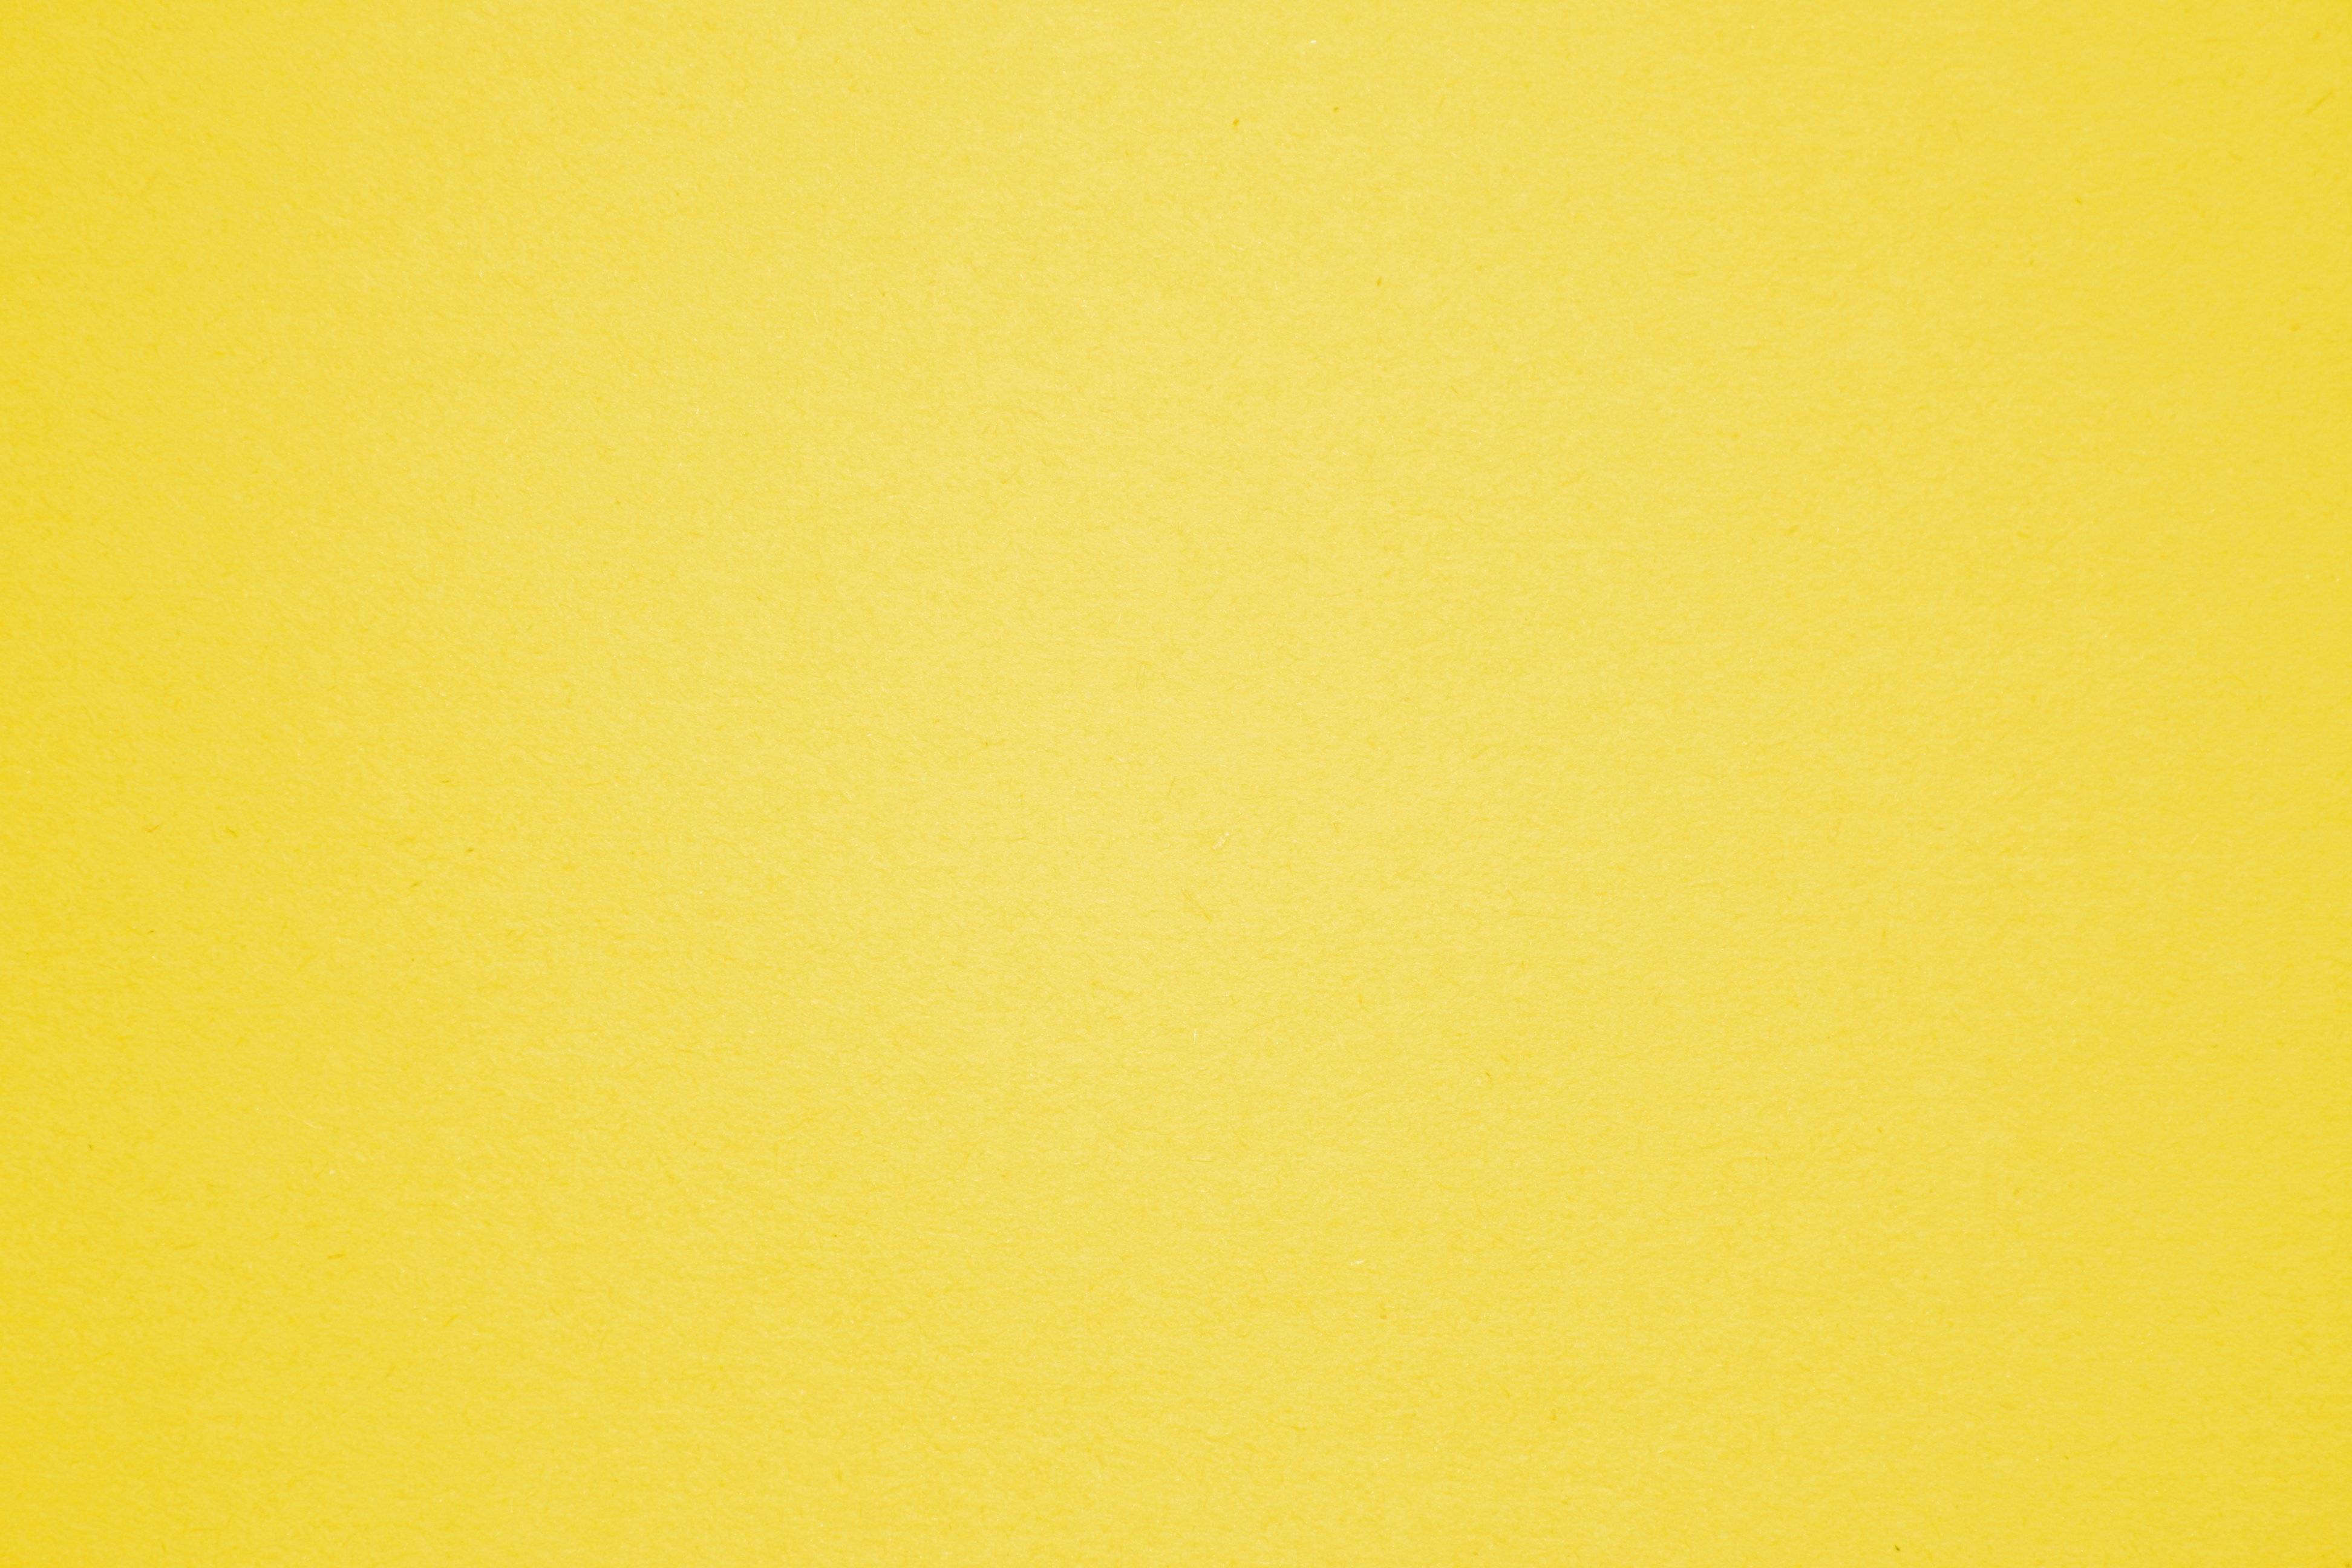 Free Download Yellow Construction Paper Texture Picture Photograph